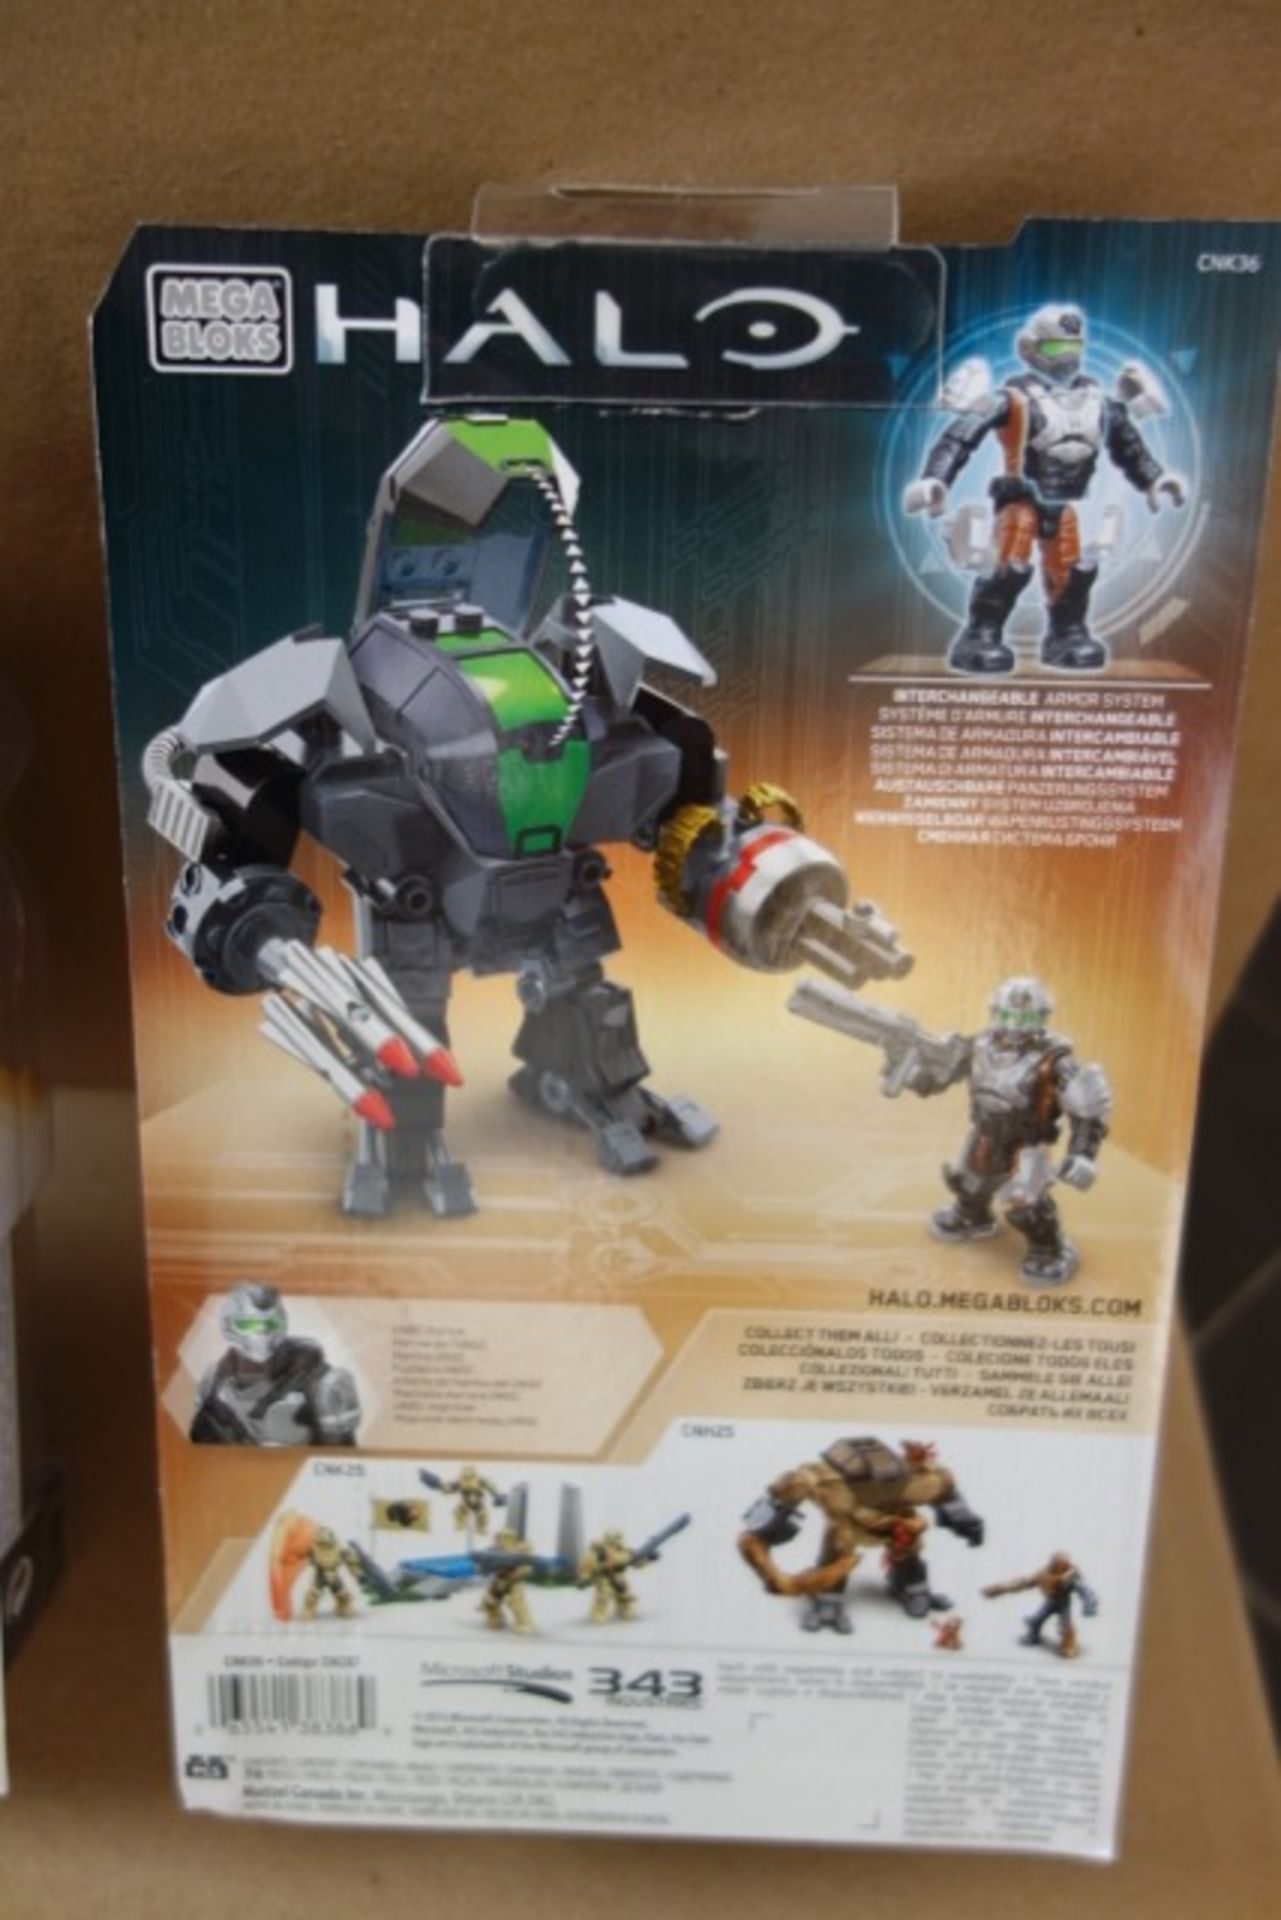 20 x Brand New Mega Bloks Halo Cyclops - Includes a mix of: Damage control cyclops, Flood infected - Image 7 of 7